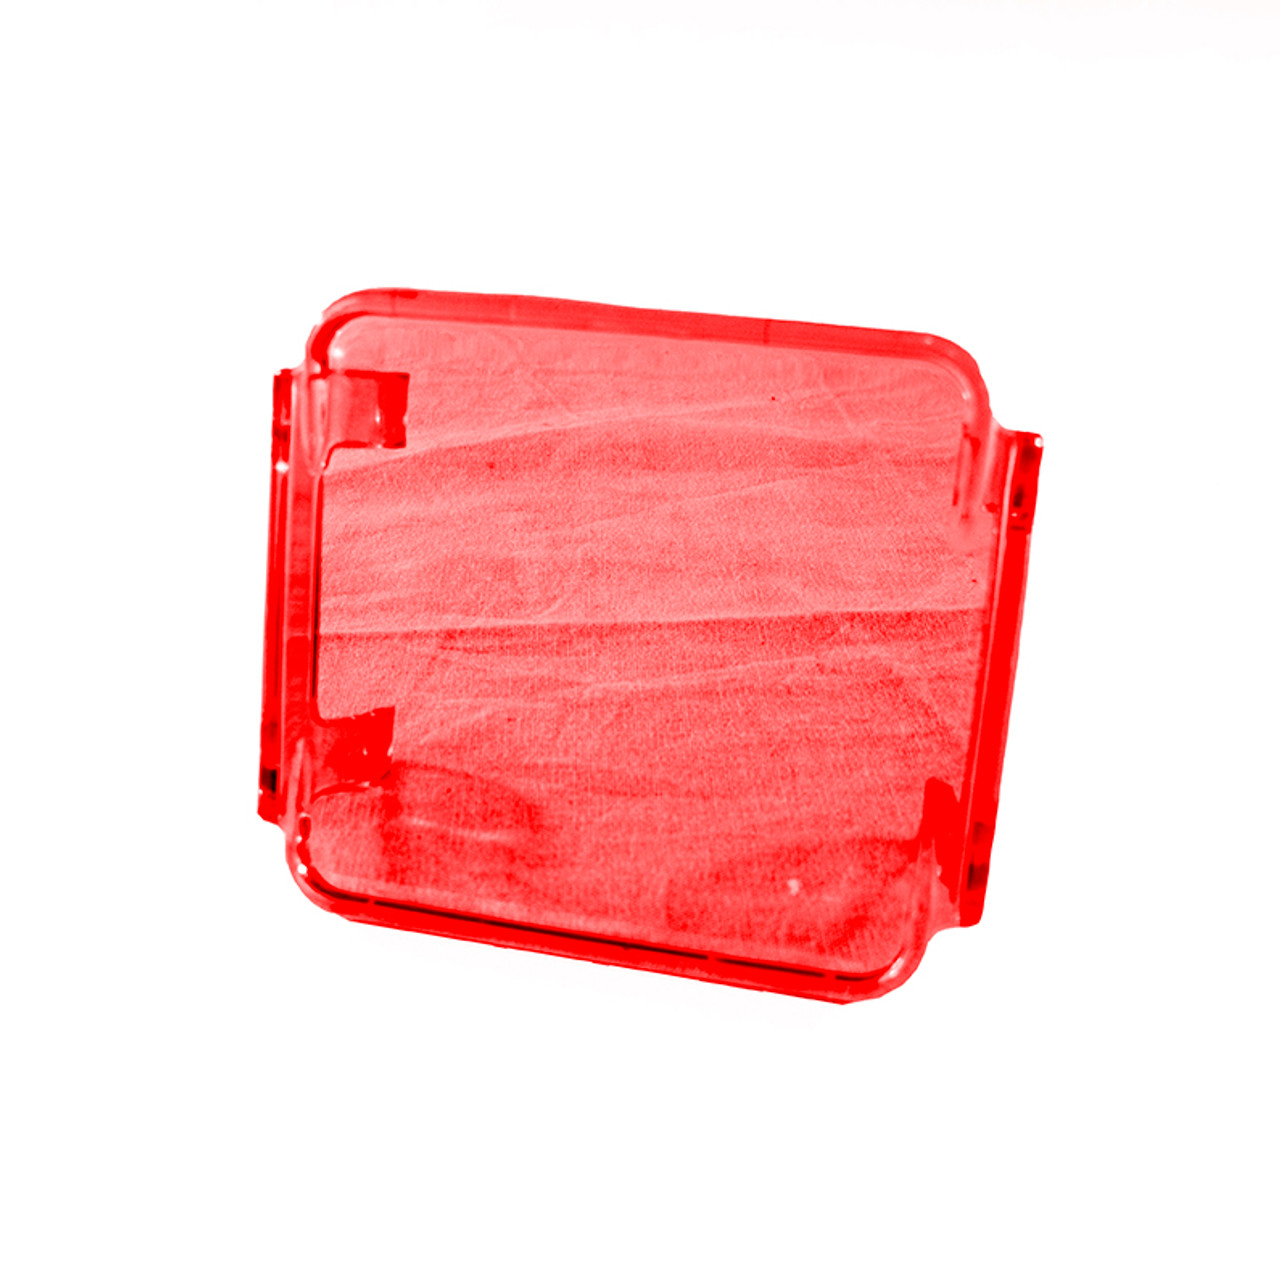 Translucent 3x3 Inch Protective Spotlight Cover Red Race Sport Lighting